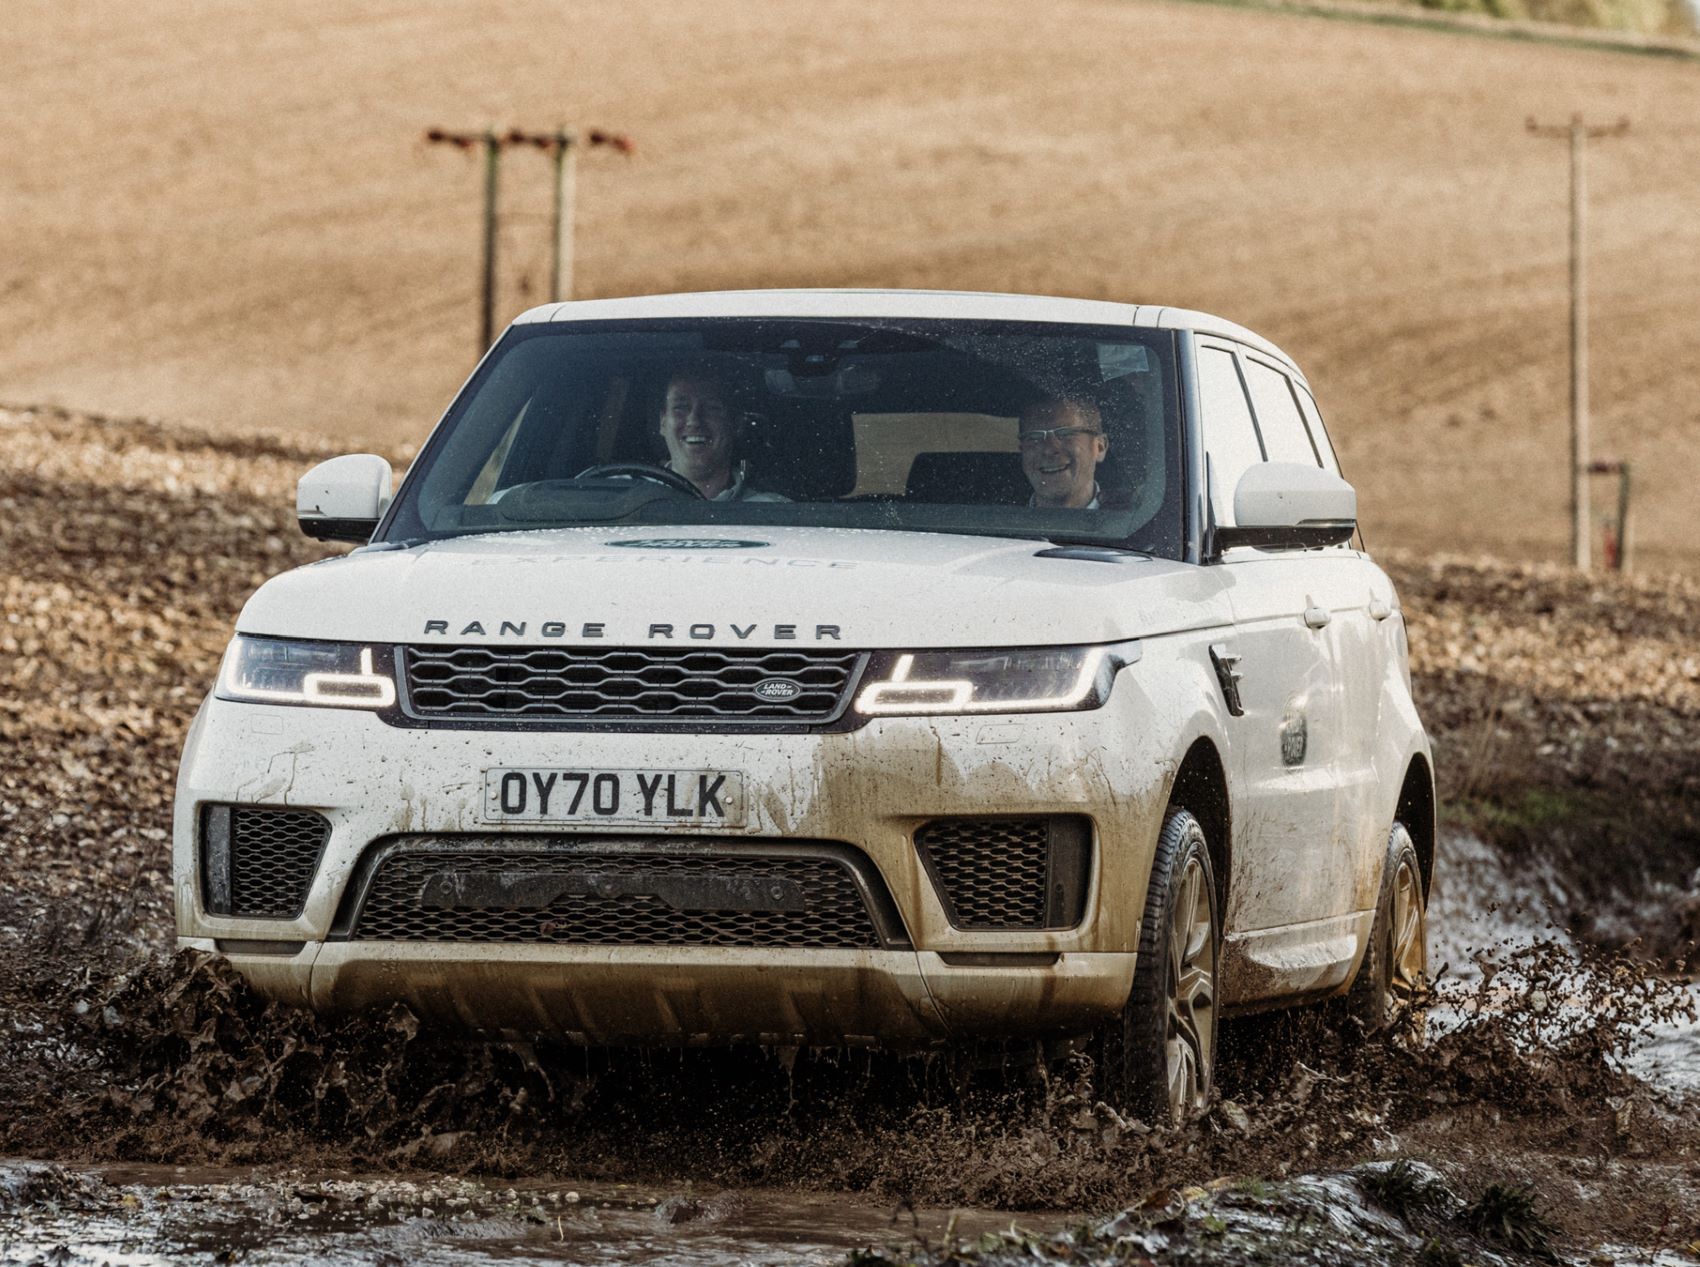 Neal Hooks Payapps Driving Land Rover   Small for Website